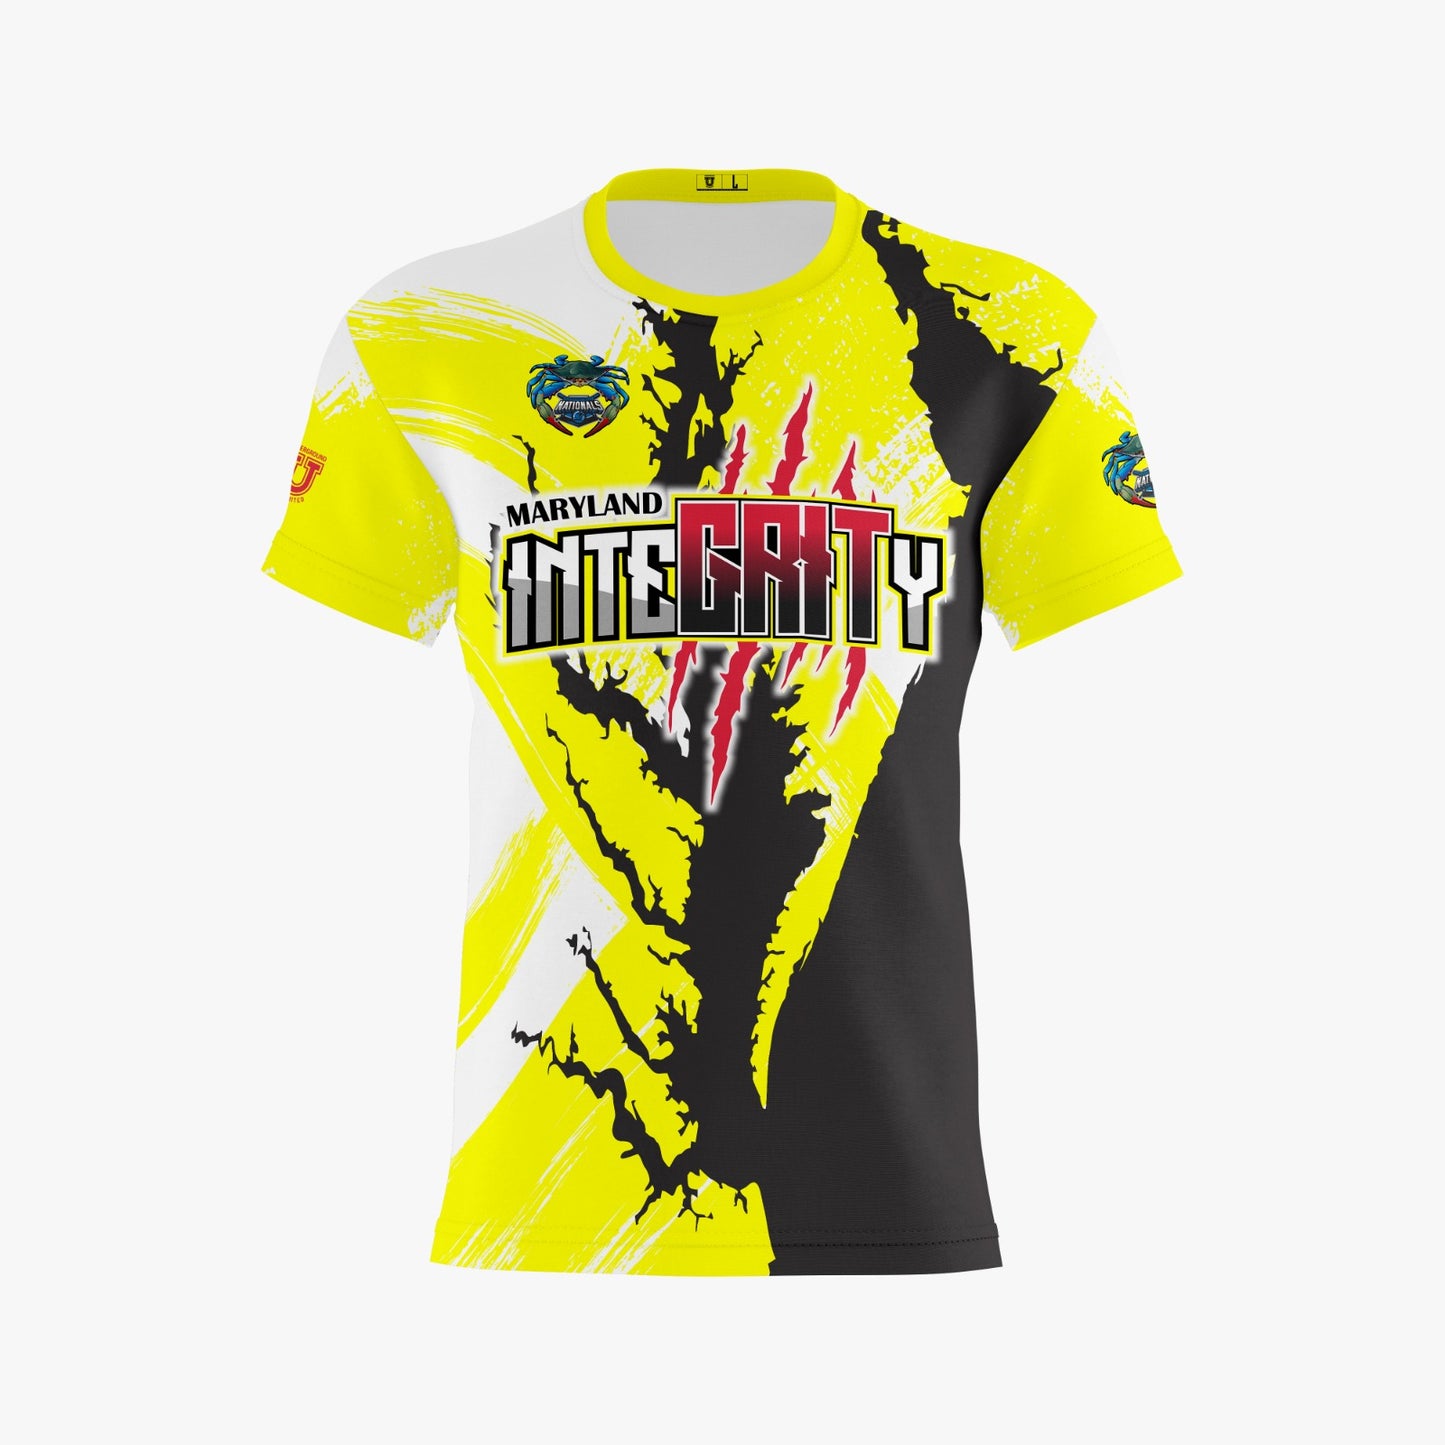 UU MD Integrity Performance Dri Tech Shirt ~ Nationals 2023 Yellow Maryland Outline